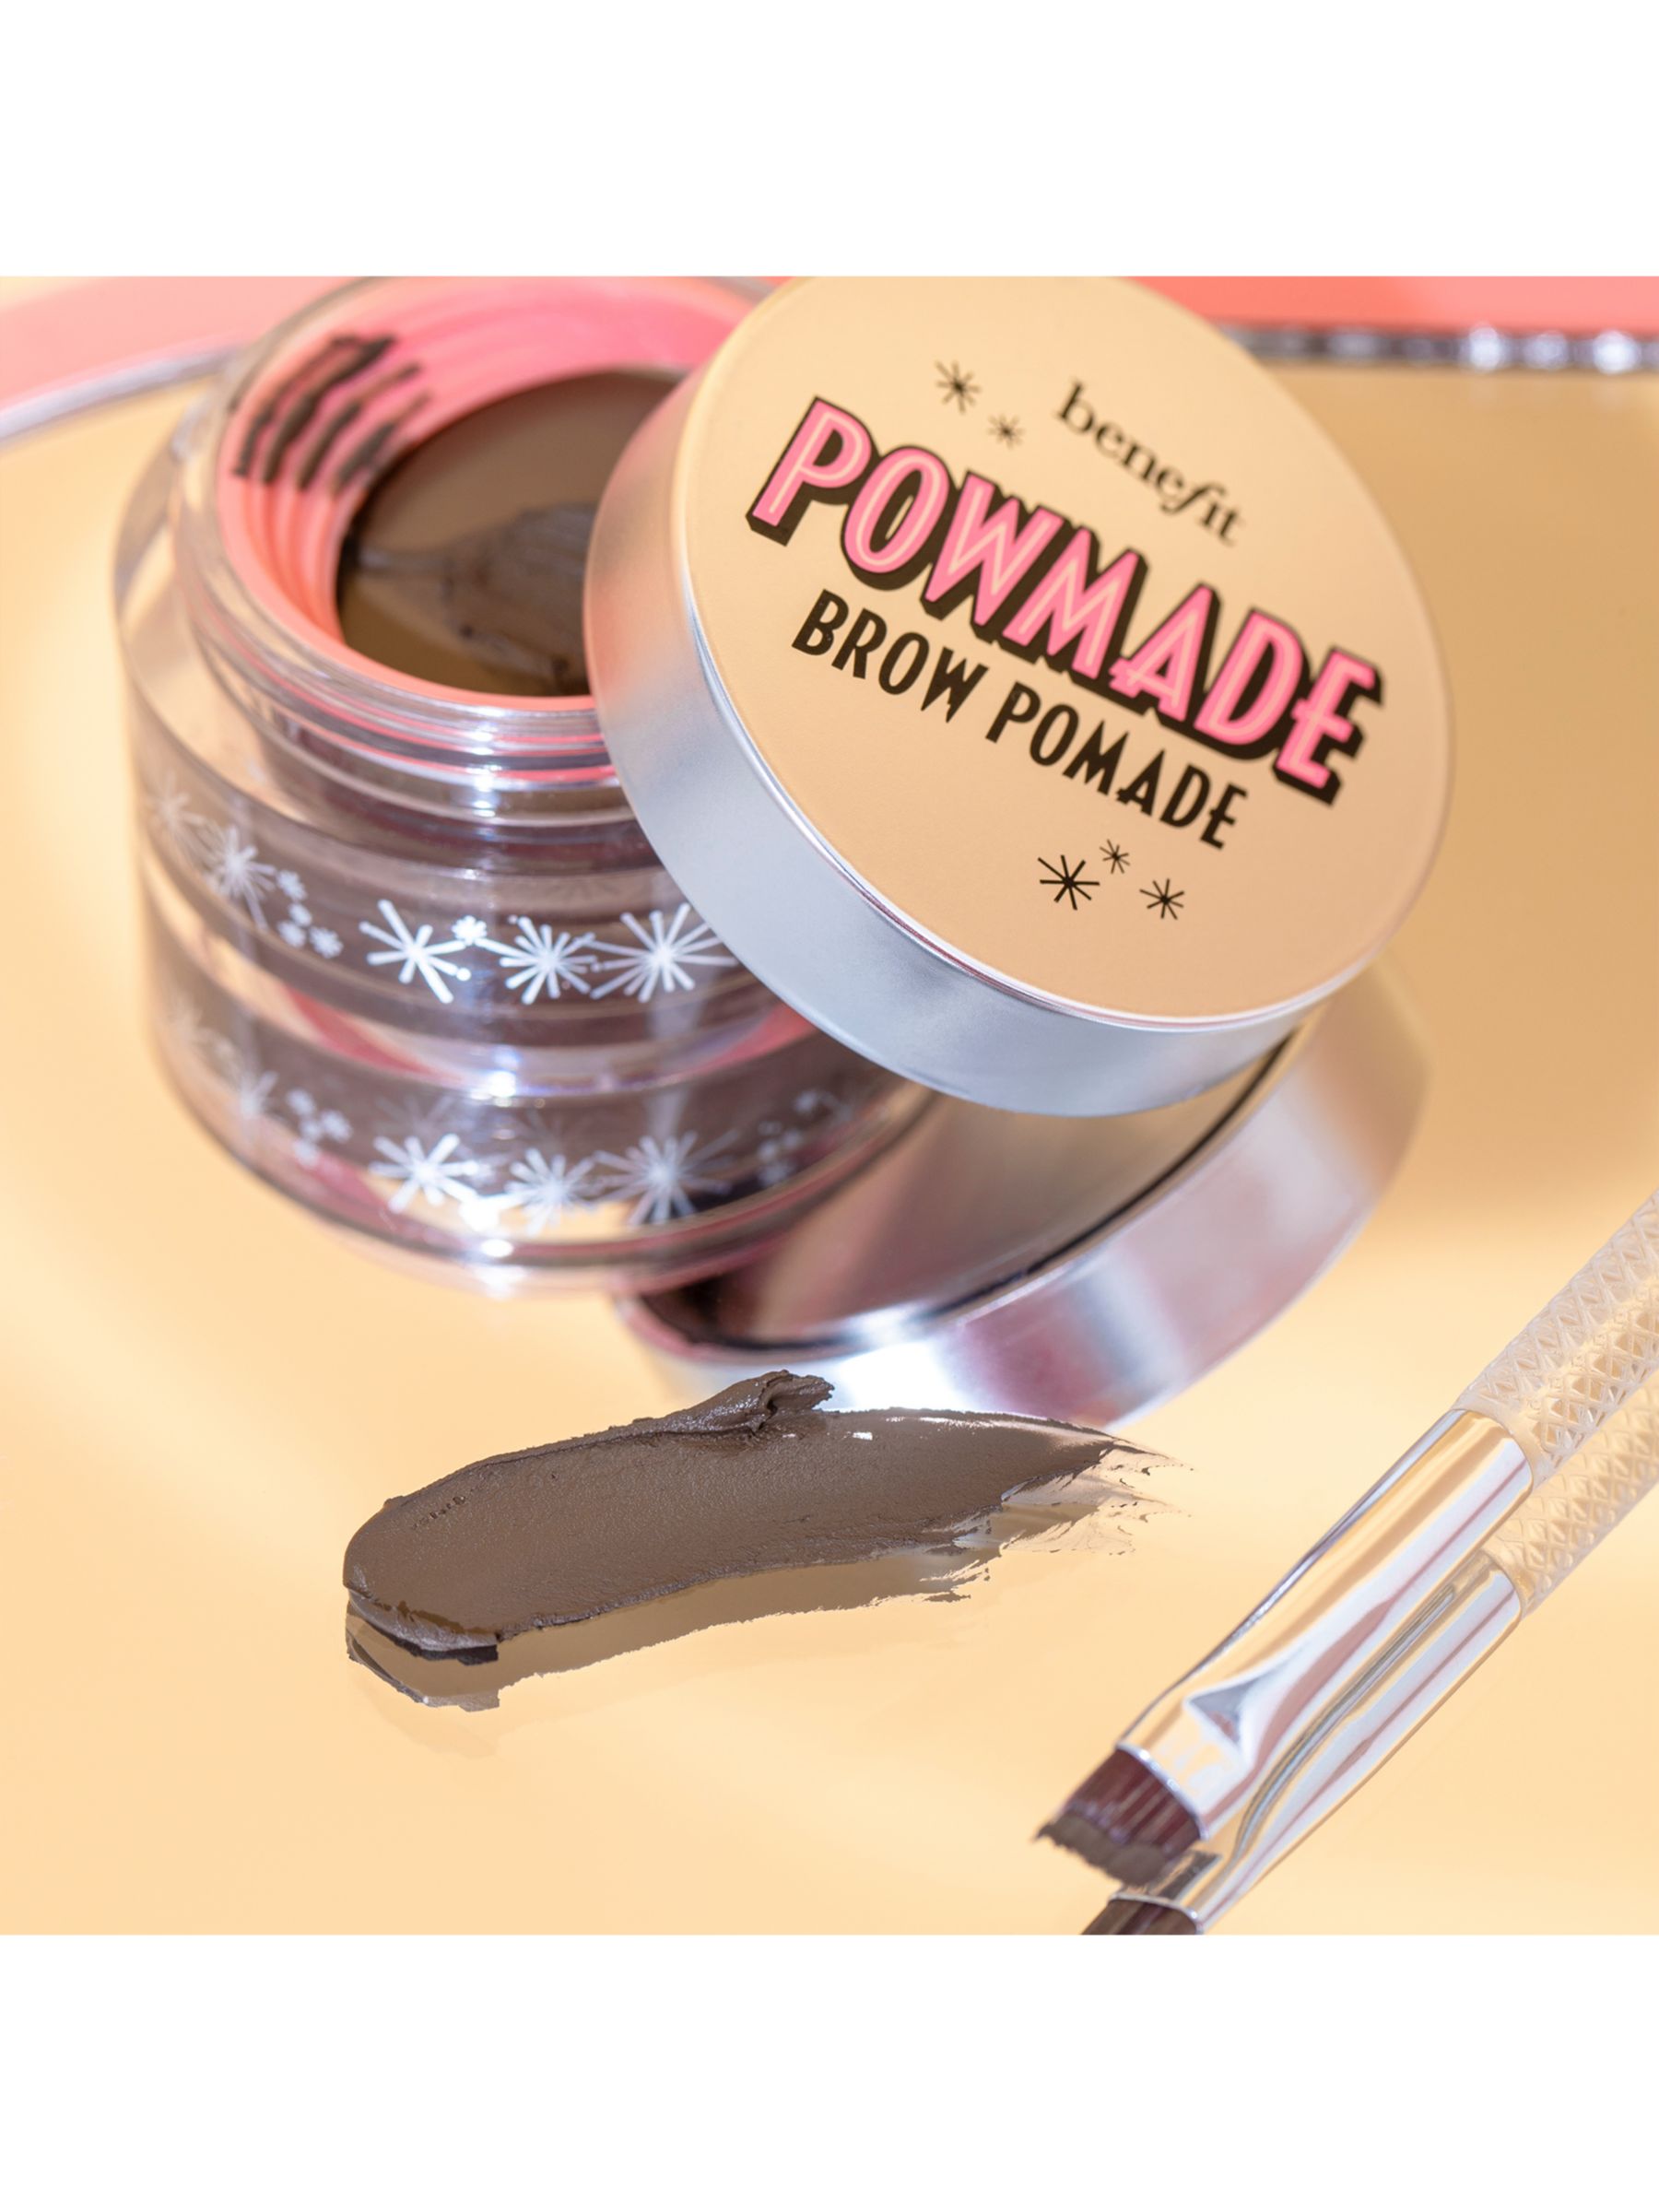 Benefit POWmade Brow Pomade Full-Pigment Brow Pomade, 02